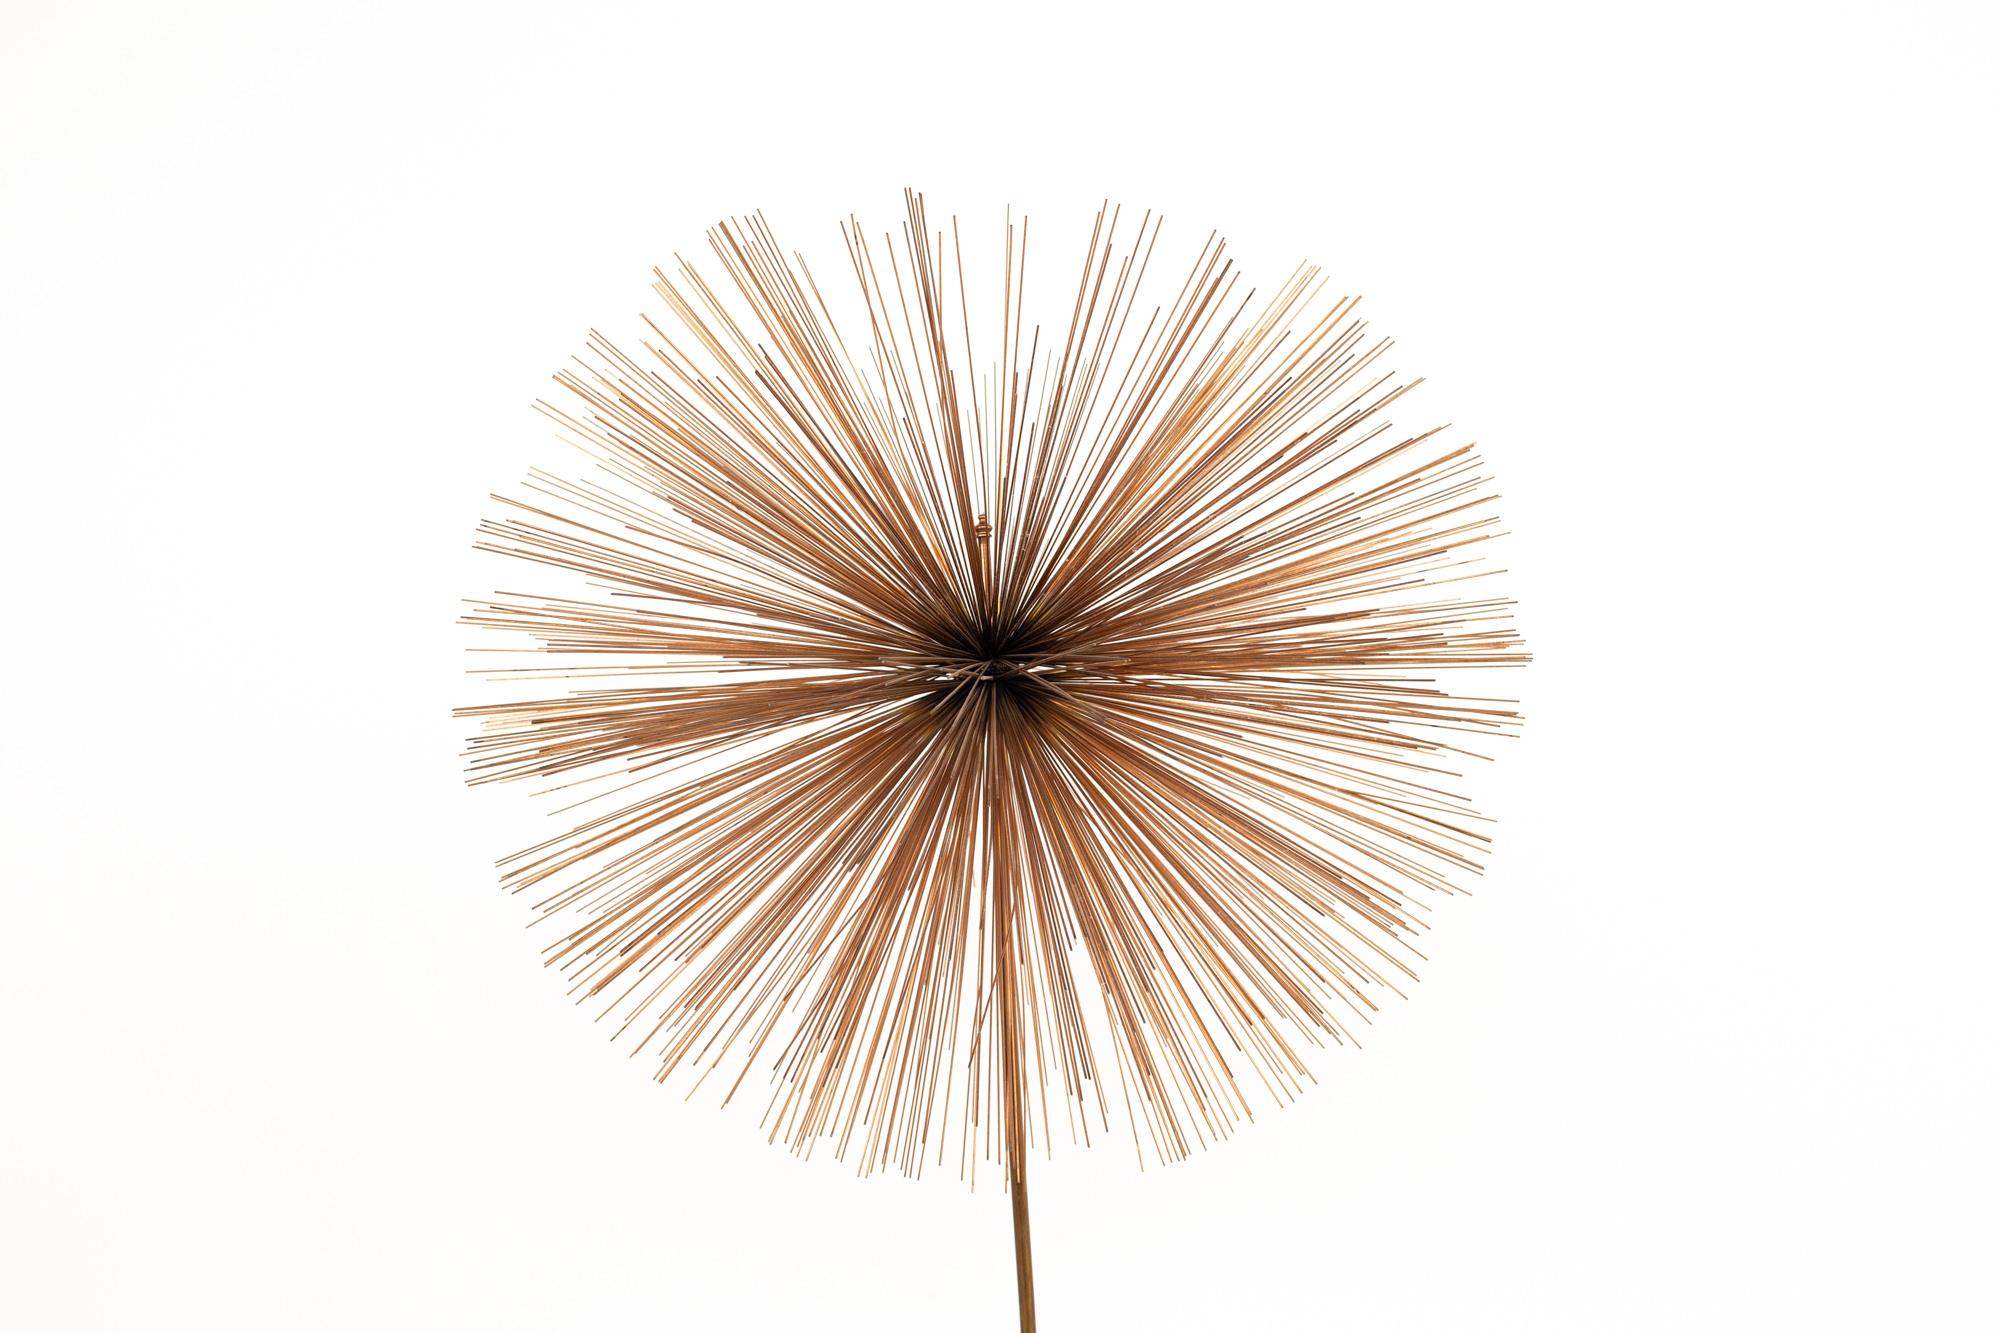 Curtis Jere Mid Century  Pom Urchin sculpture
Sculpture measures: 18 wide x 18 deep x 35 high

This sculpture is in great vintage condition.
 